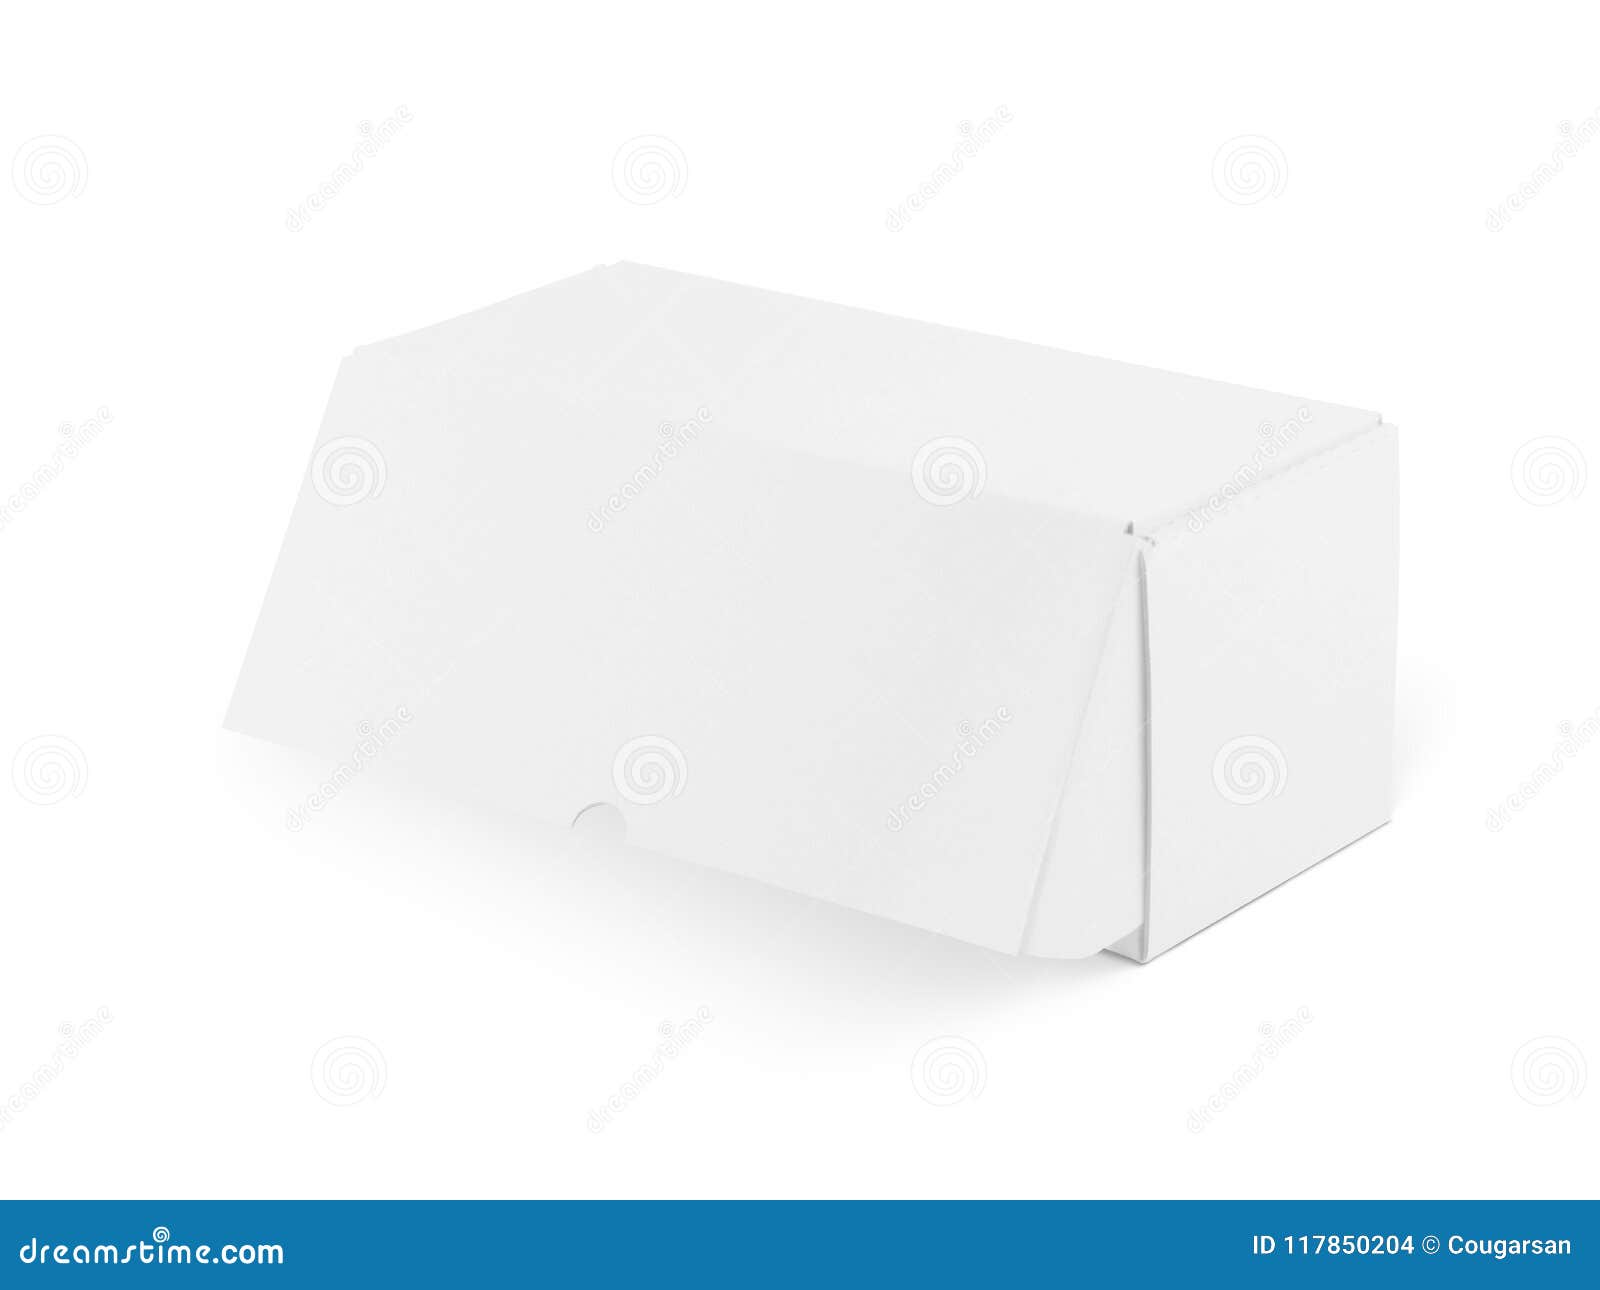 Download Isolated White Packaging Box For Branding Mockup Stock ...